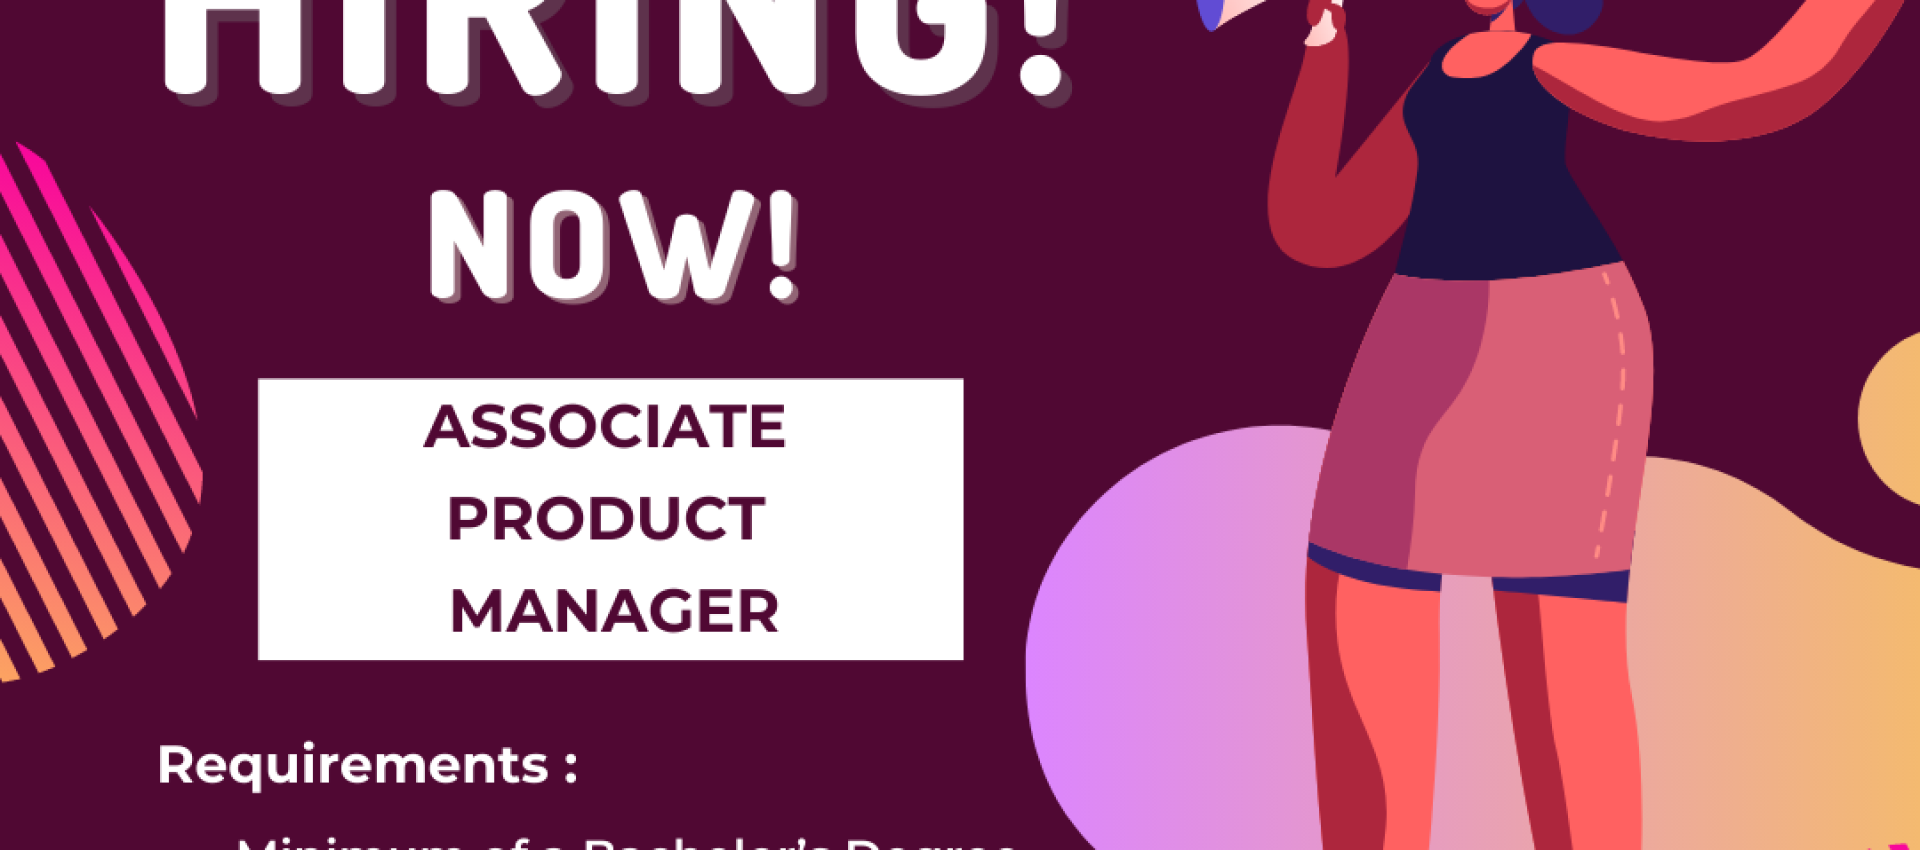 We're hiring ! an Associate Product Manager